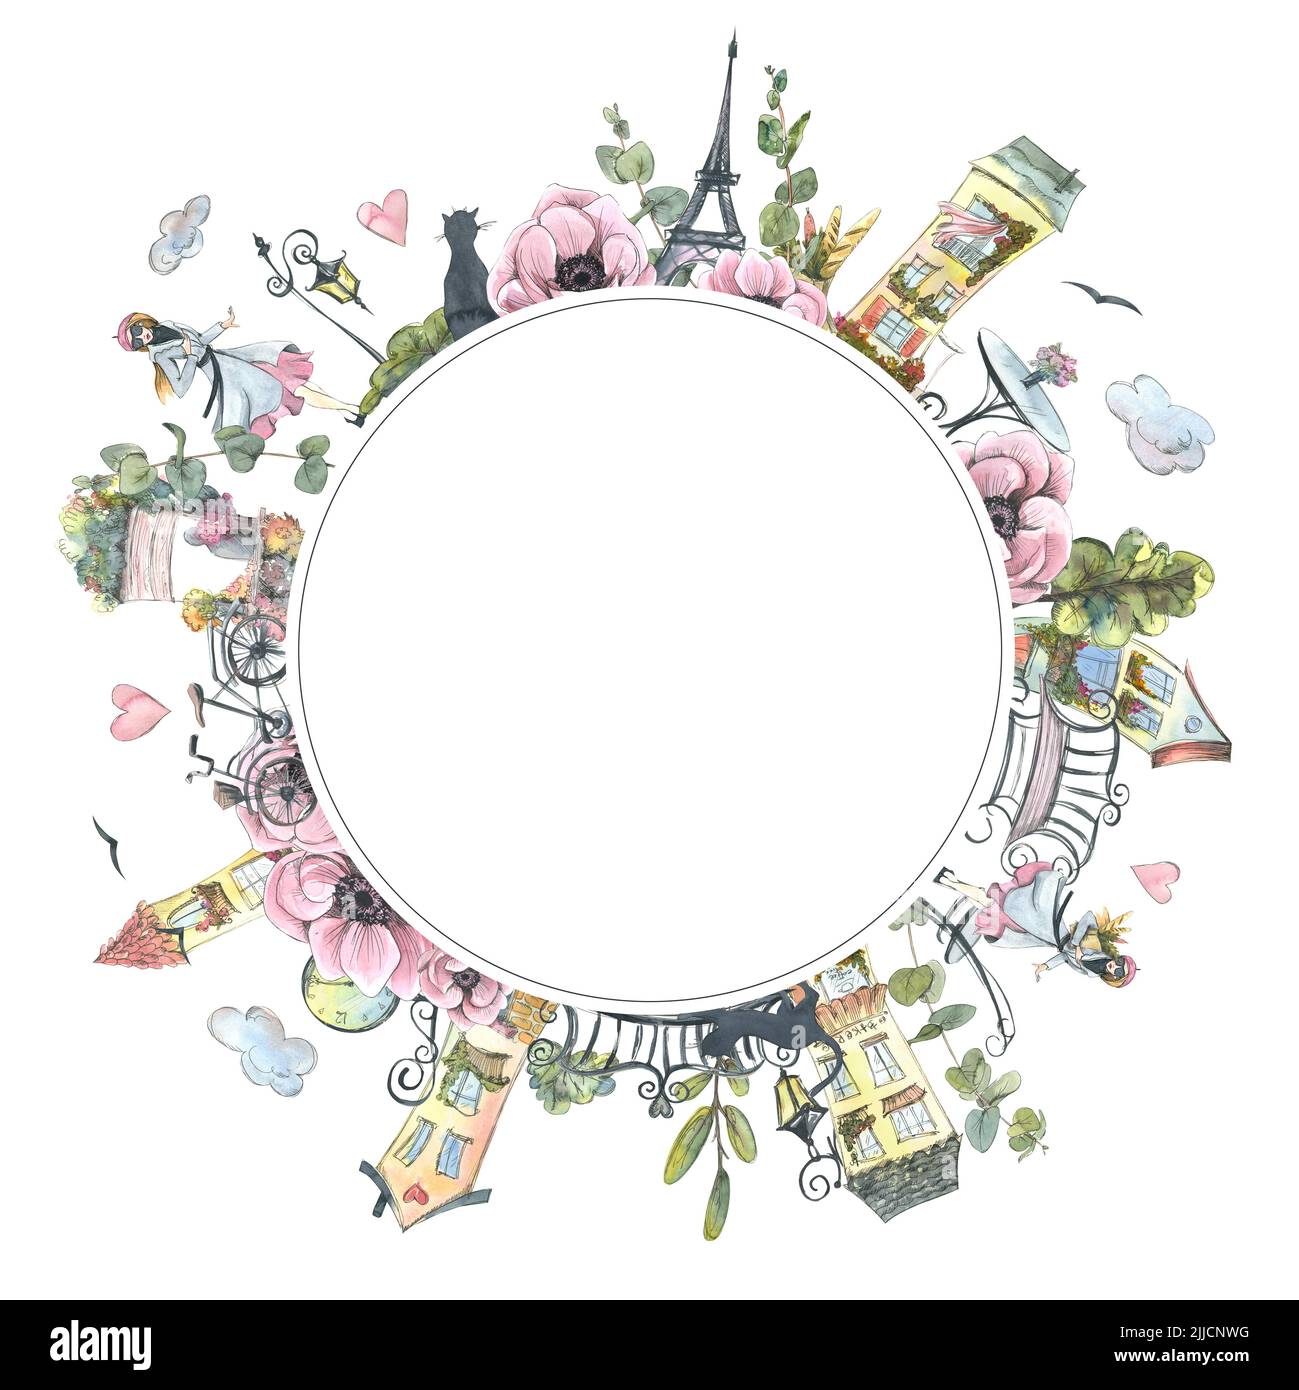 Round frame with Parisian streets, Eiffel tower, flowers and greenery. Watercolor illustration in sketch style, with graphic elements from a large set Stock Photo